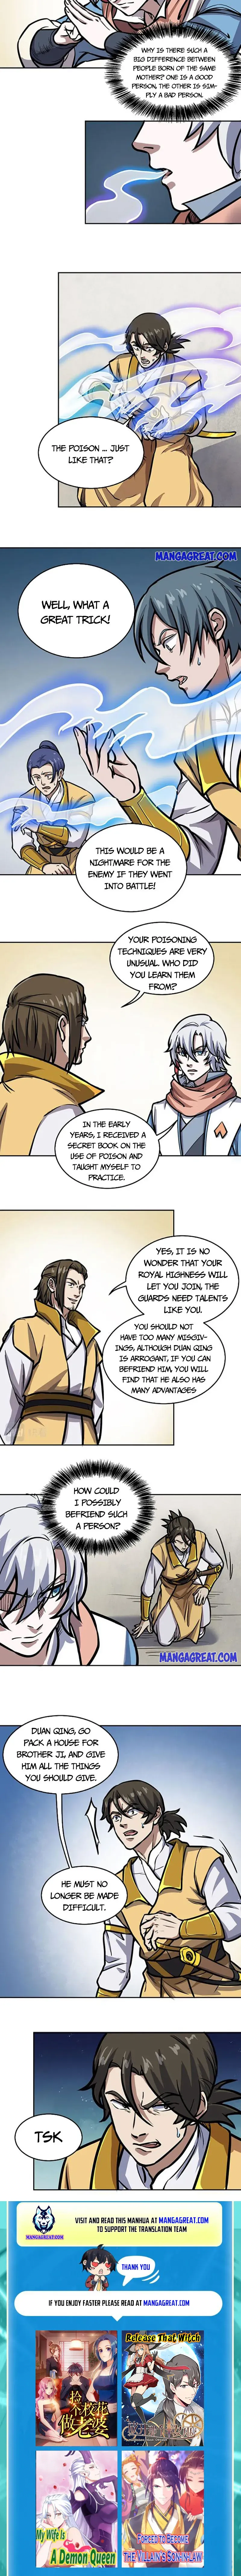 Martial Arts Reigns Chapter 457 page 6